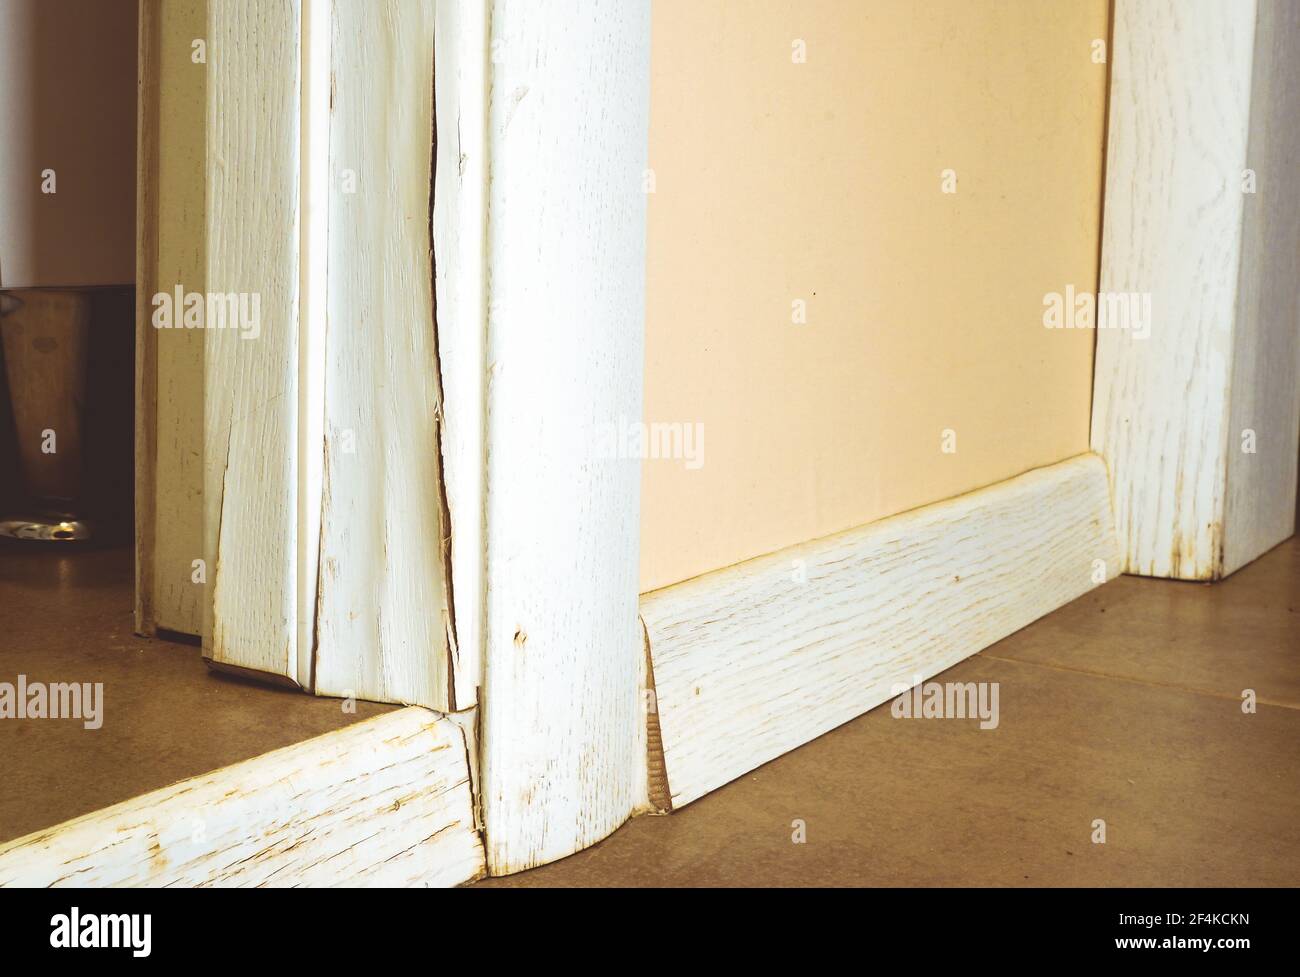 Crack in the wooden door casing after the apartment was flooded. Stock Photo